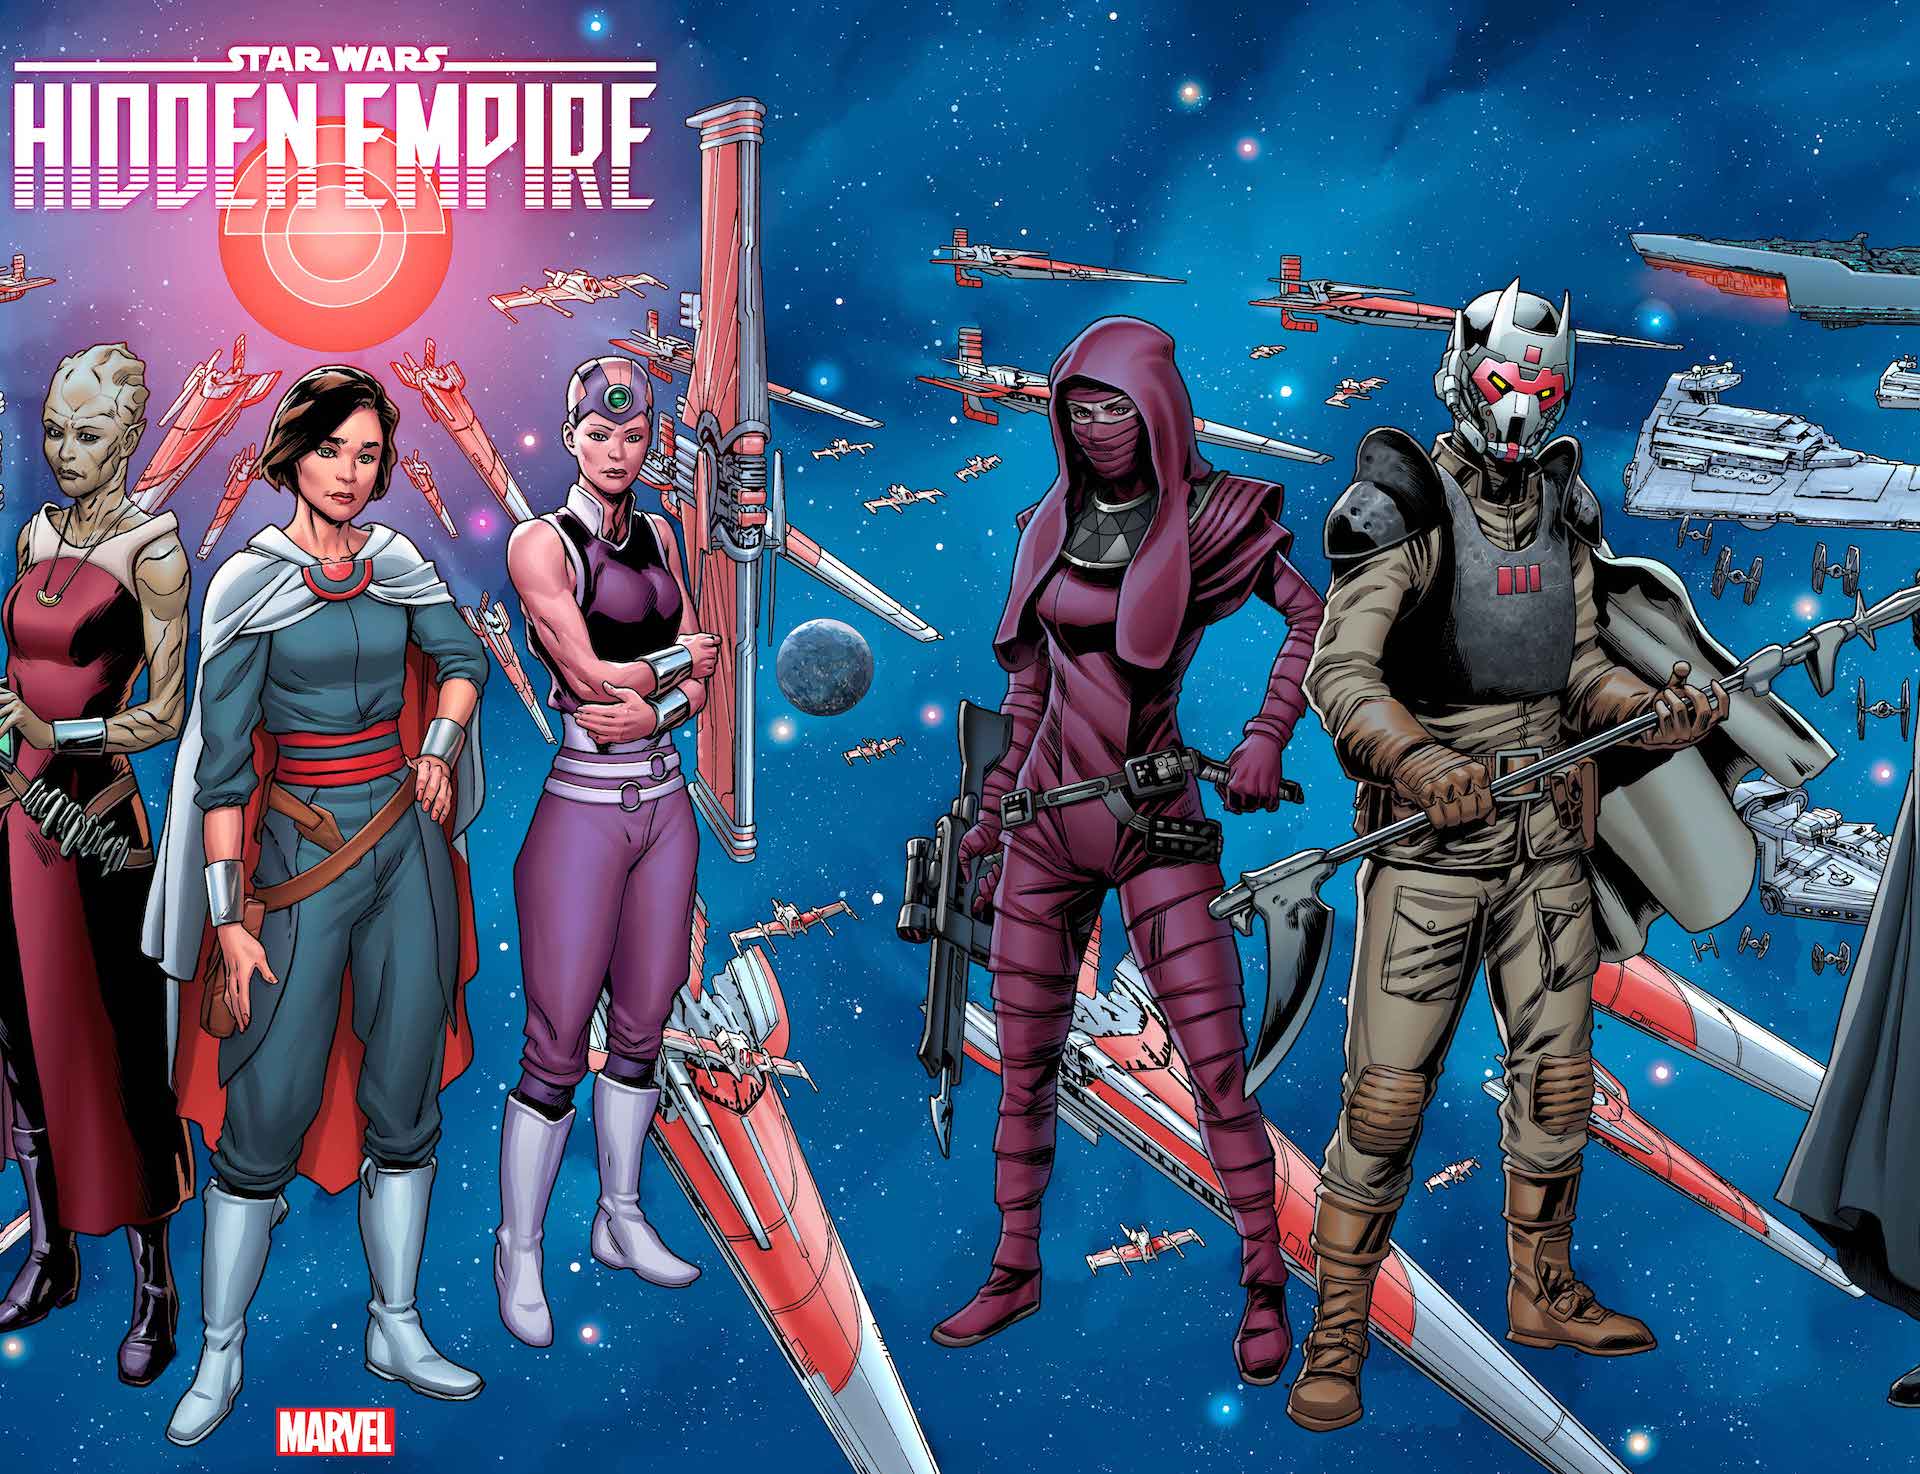 Darth Vader, Lady Qi'ra, and the Knights of Ren come crashing together in 'Star Wars: Hidden Empire'